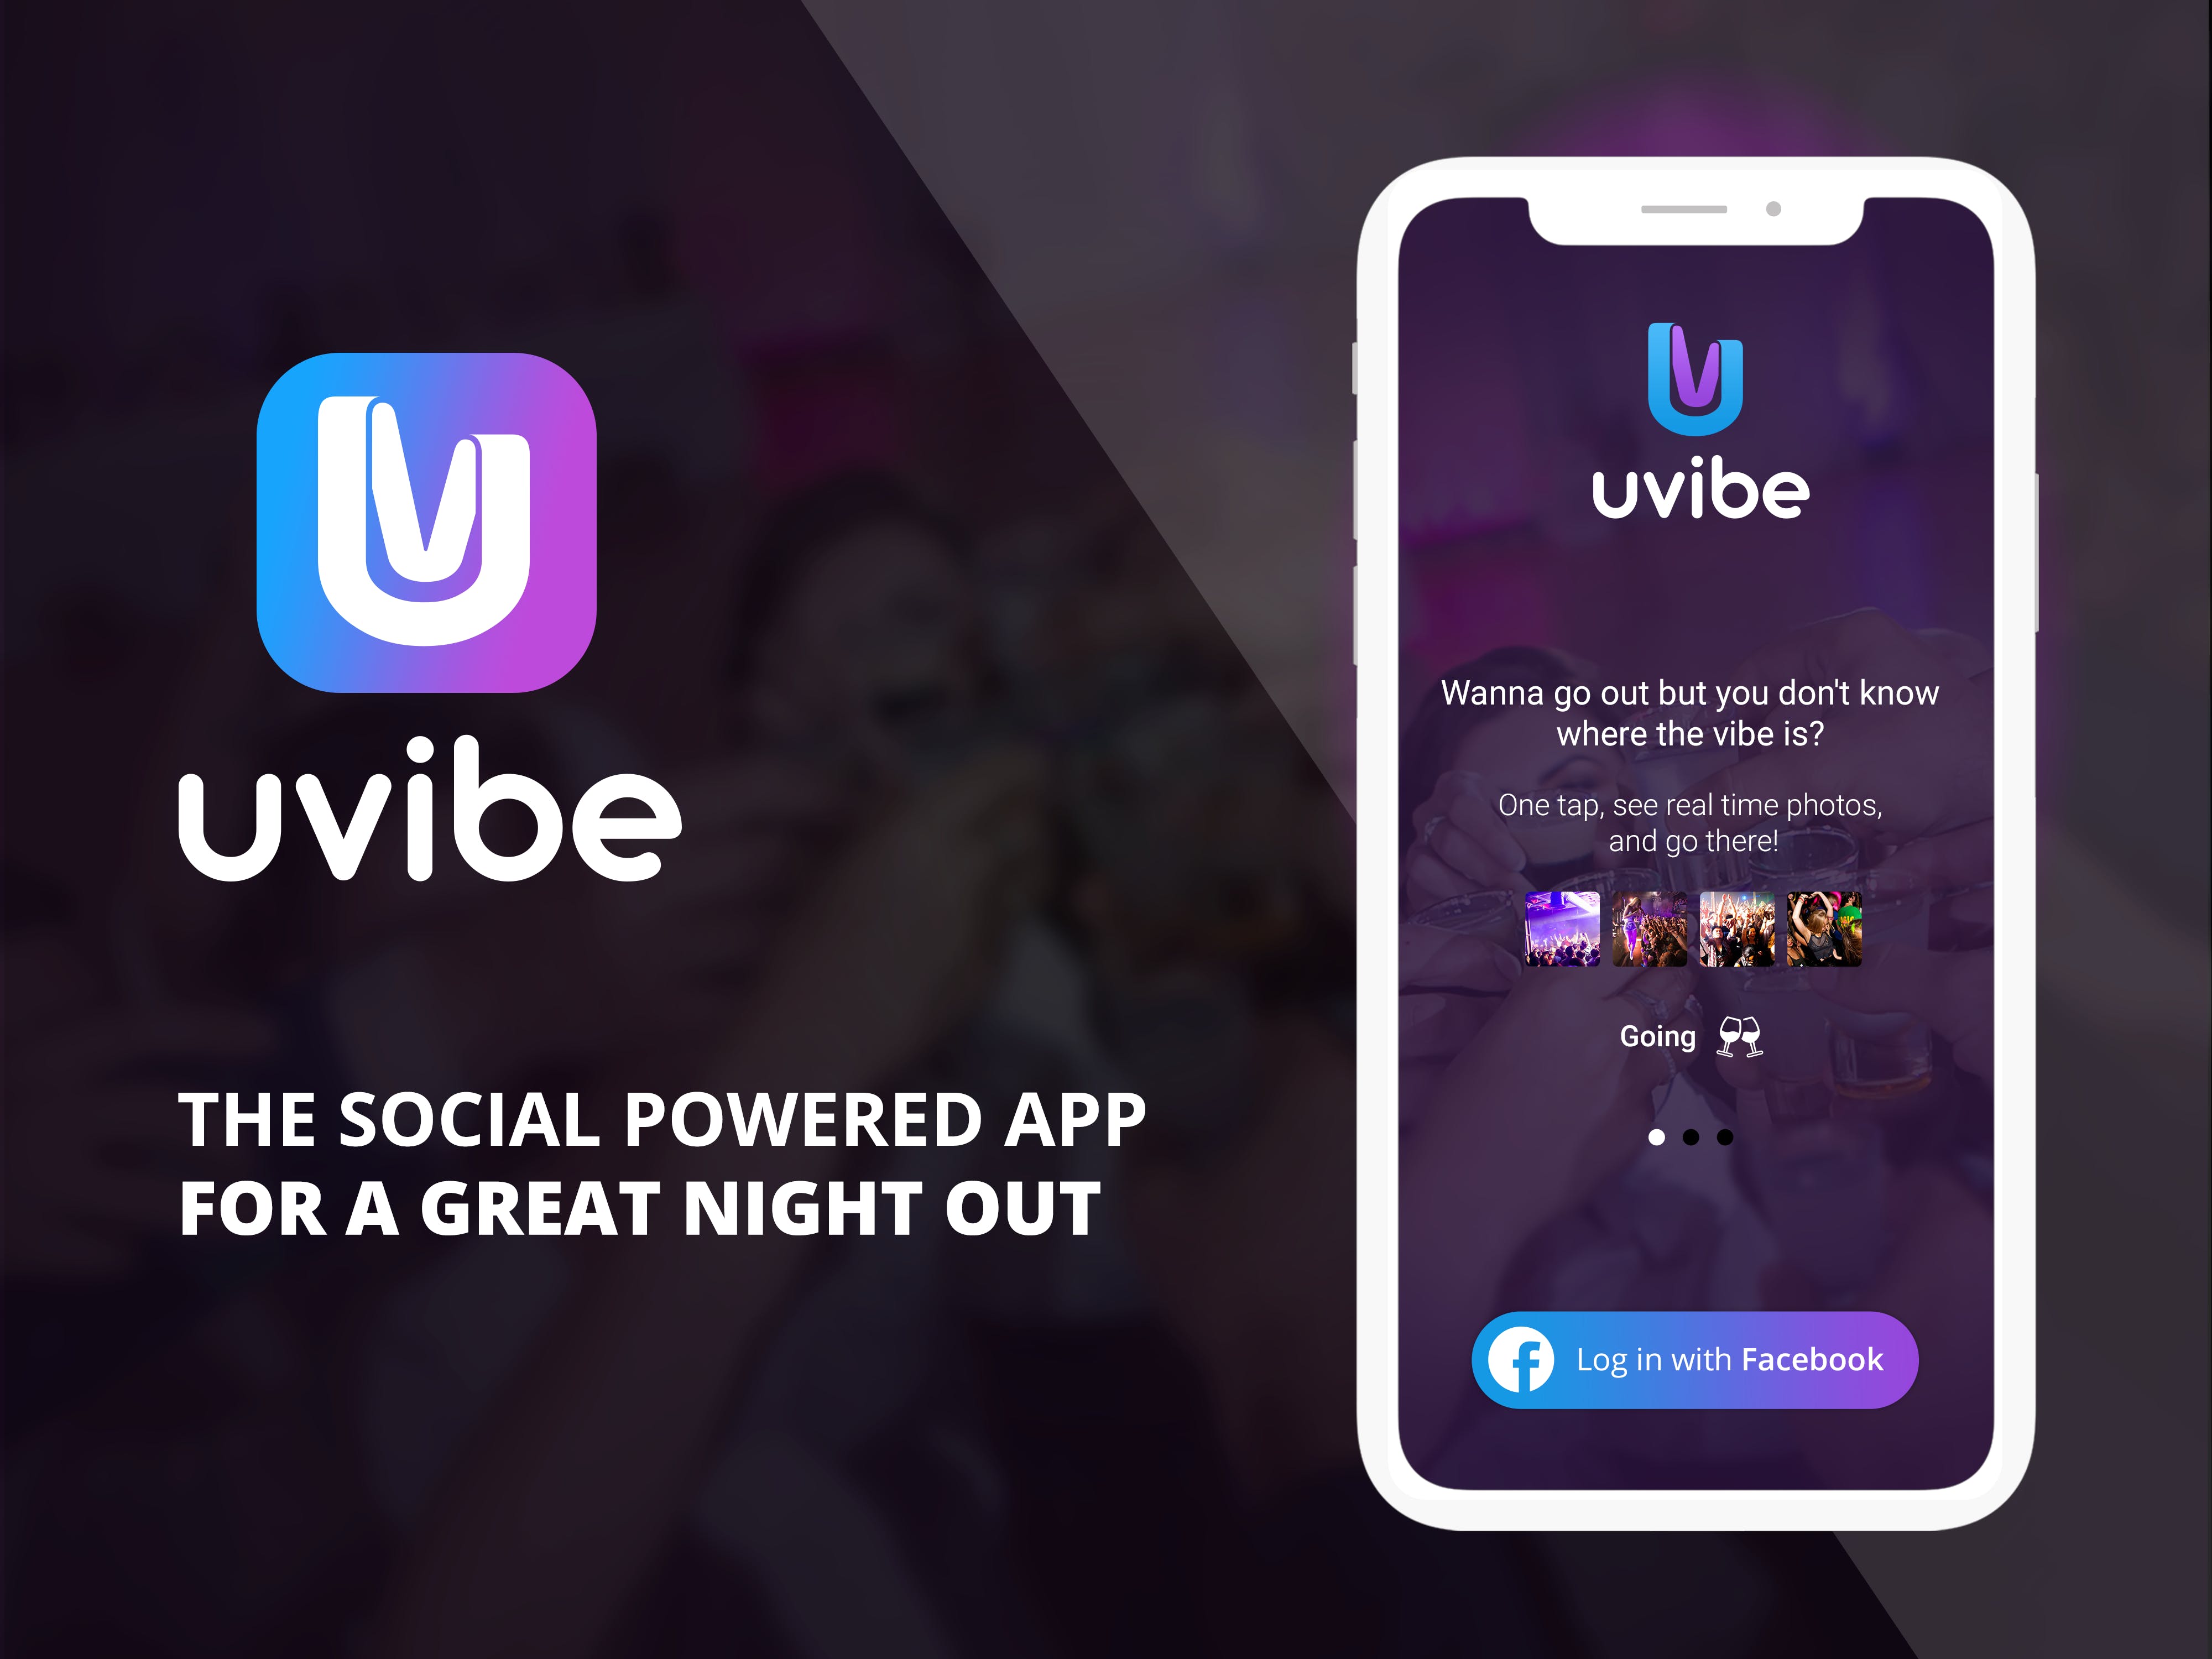 uVibe: Real Time City Guide media 3